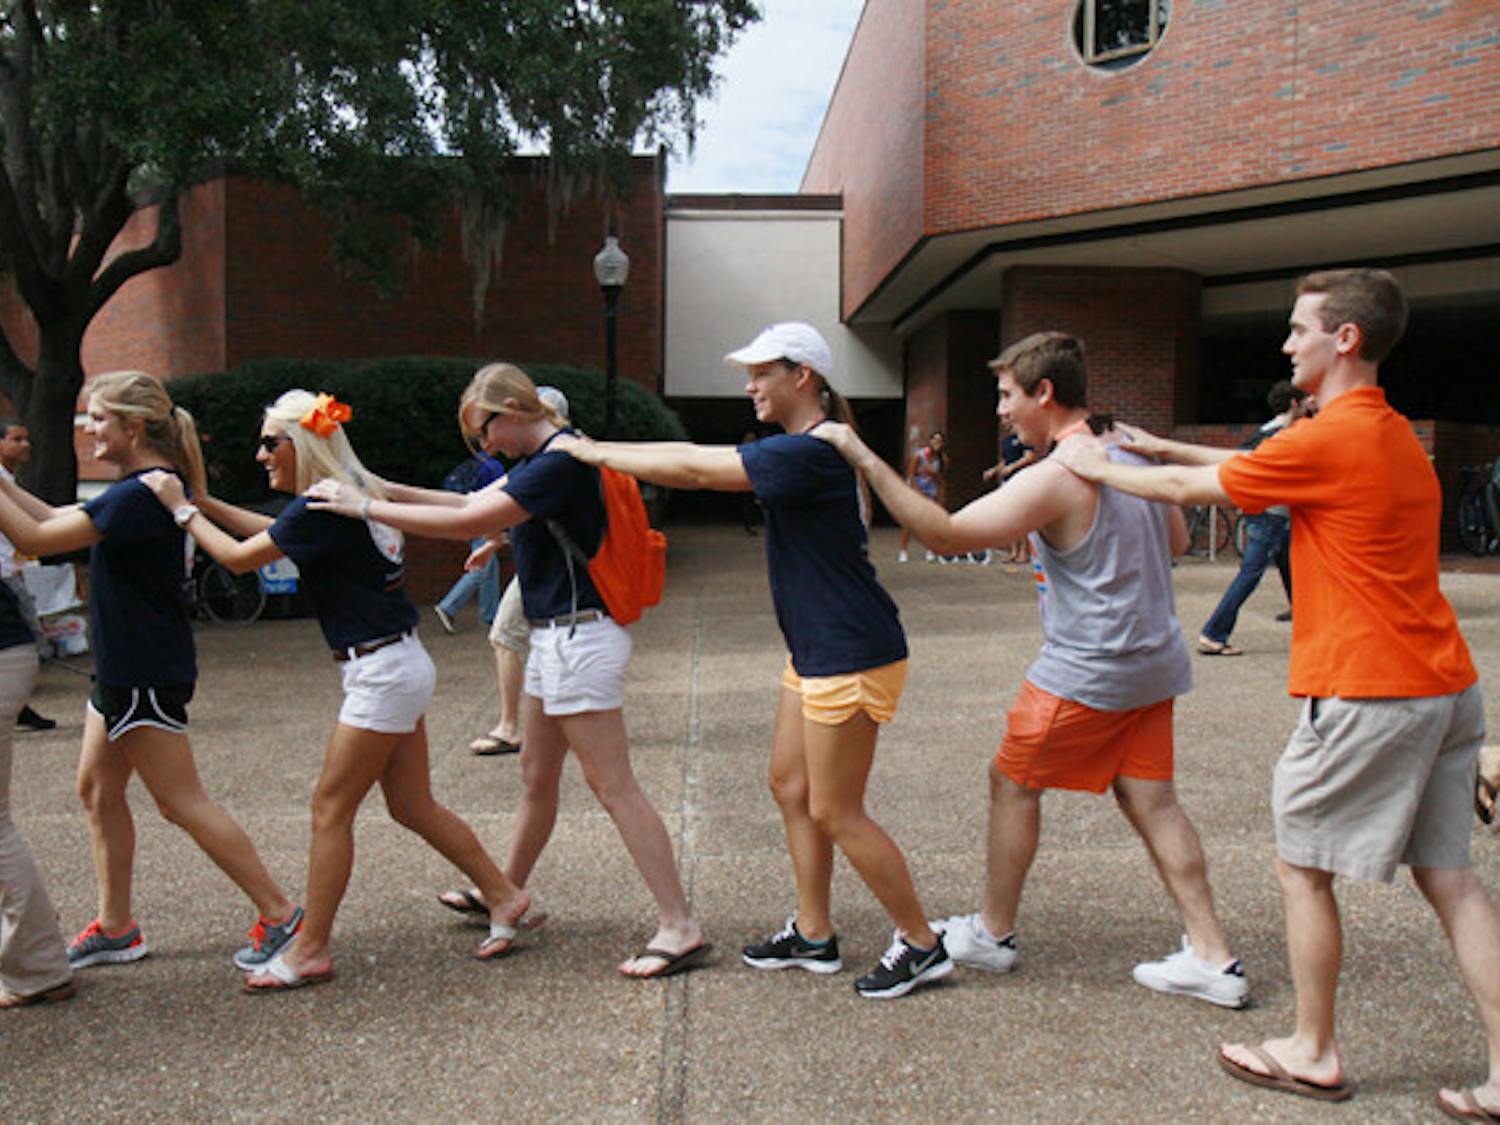 Students form a conga line on Turlington Plaza on Wednesday afternoon as part of a flash mob to promote Gator Growl 2011.